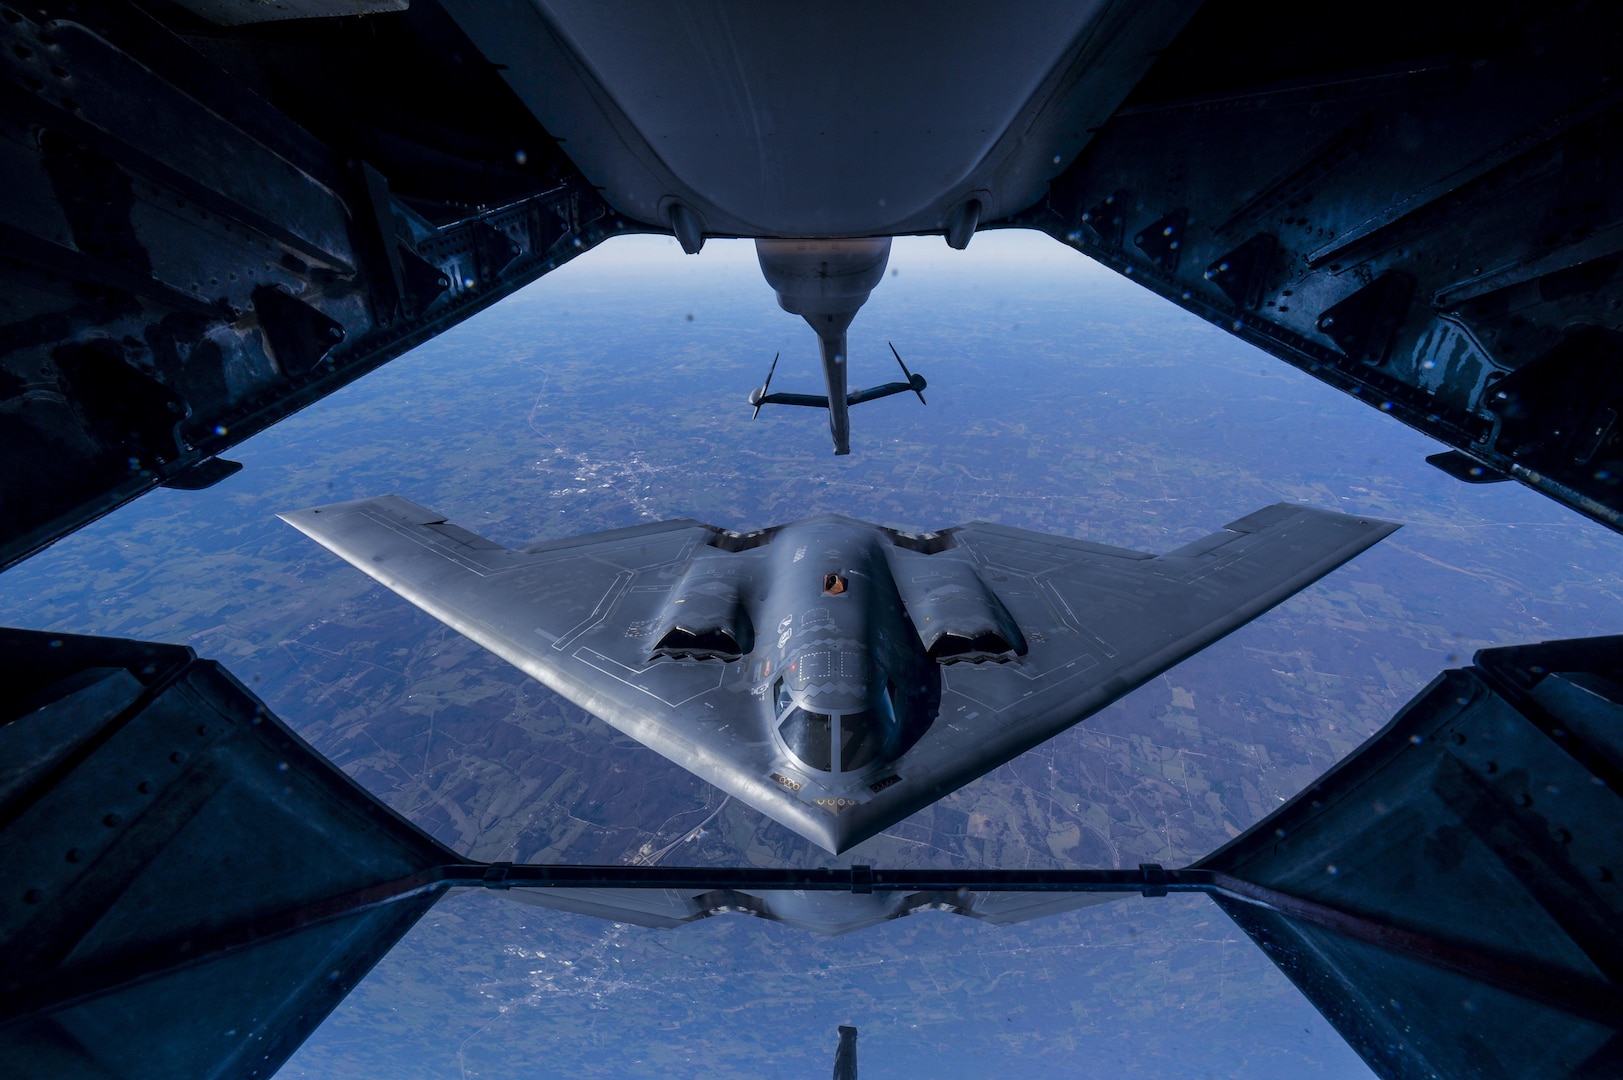 A 2nd Air Refueling Squadron KC-10 Extender from Joint Base McGuire-Dix-Lakehurst, N.J., prepares to refuel a B-2 Spirit, during a training exercise near Kansas, Nov. 10, 2016. The KC-10 Extender is an Air Mobility Command advanced tanker and cargo aircraft designed to provide increased global mobility for U.S. armed forces. Although the KC-l0's primary mission is aerial refueling, it can combine the tasks of a tanker and cargo aircraft by refueling fighters and simultaneously carry the fighter support personnel and equipment on overseas deployments. (U.S. Air Force photo by Senior Airman Keith James/Released)